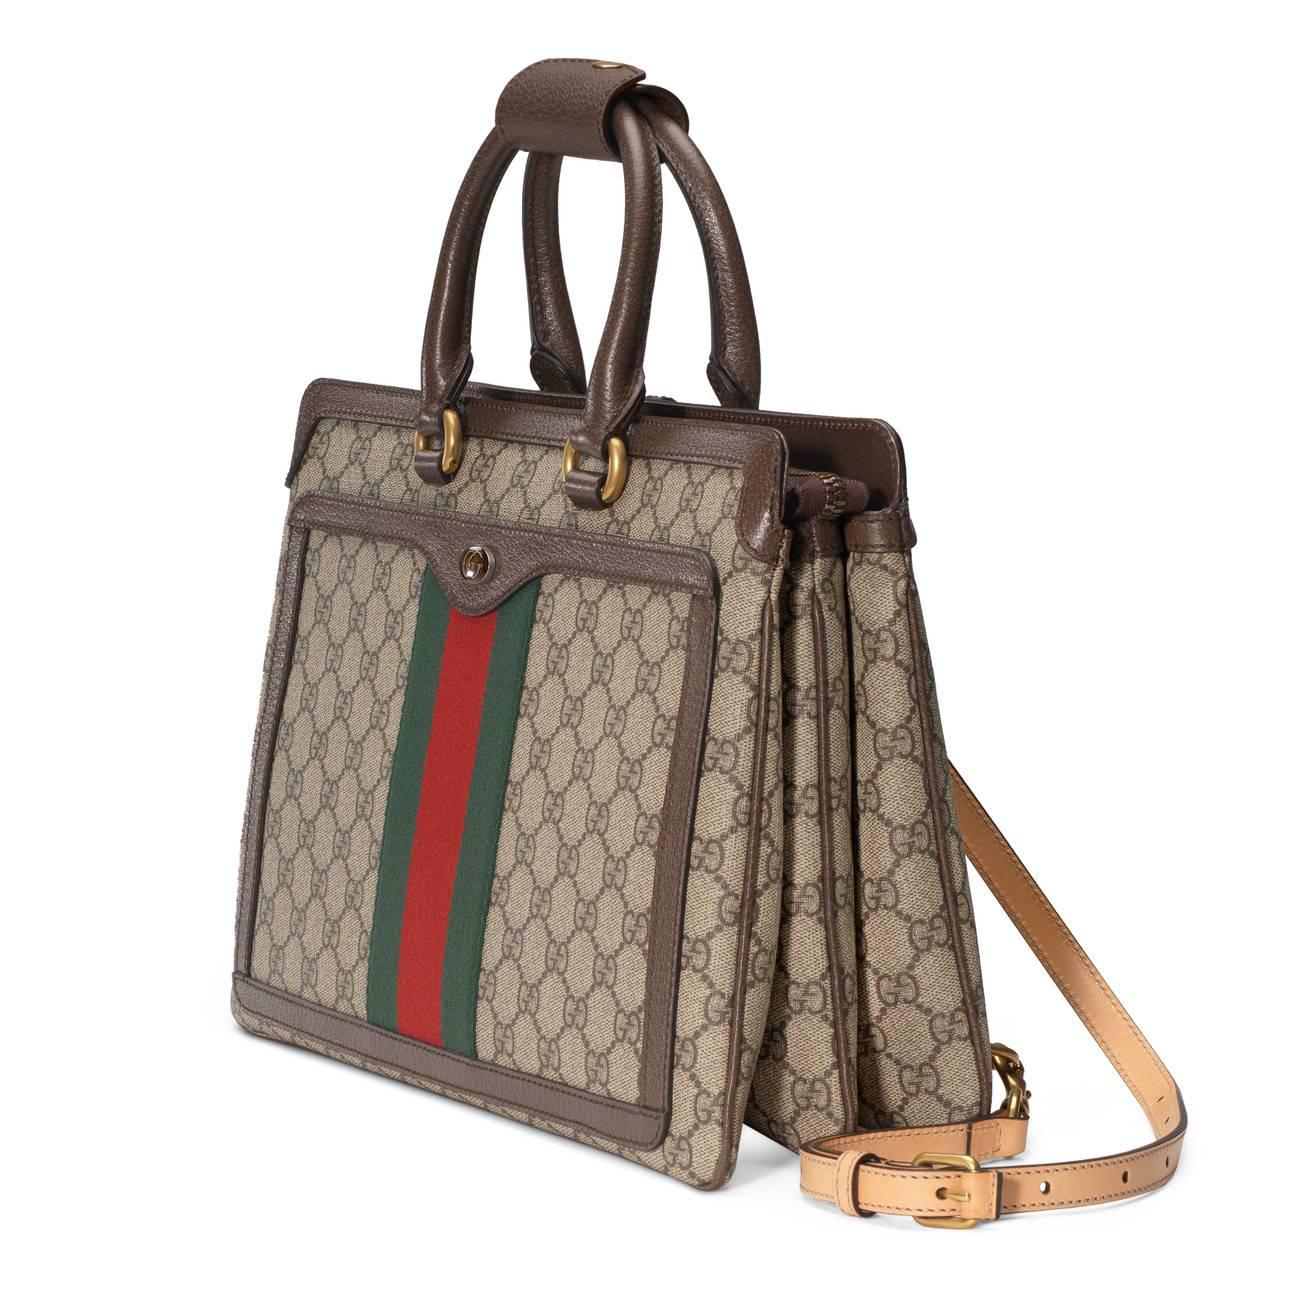 Gucci Canvas Ophidia GG Backpack in Brown for Men - Lyst